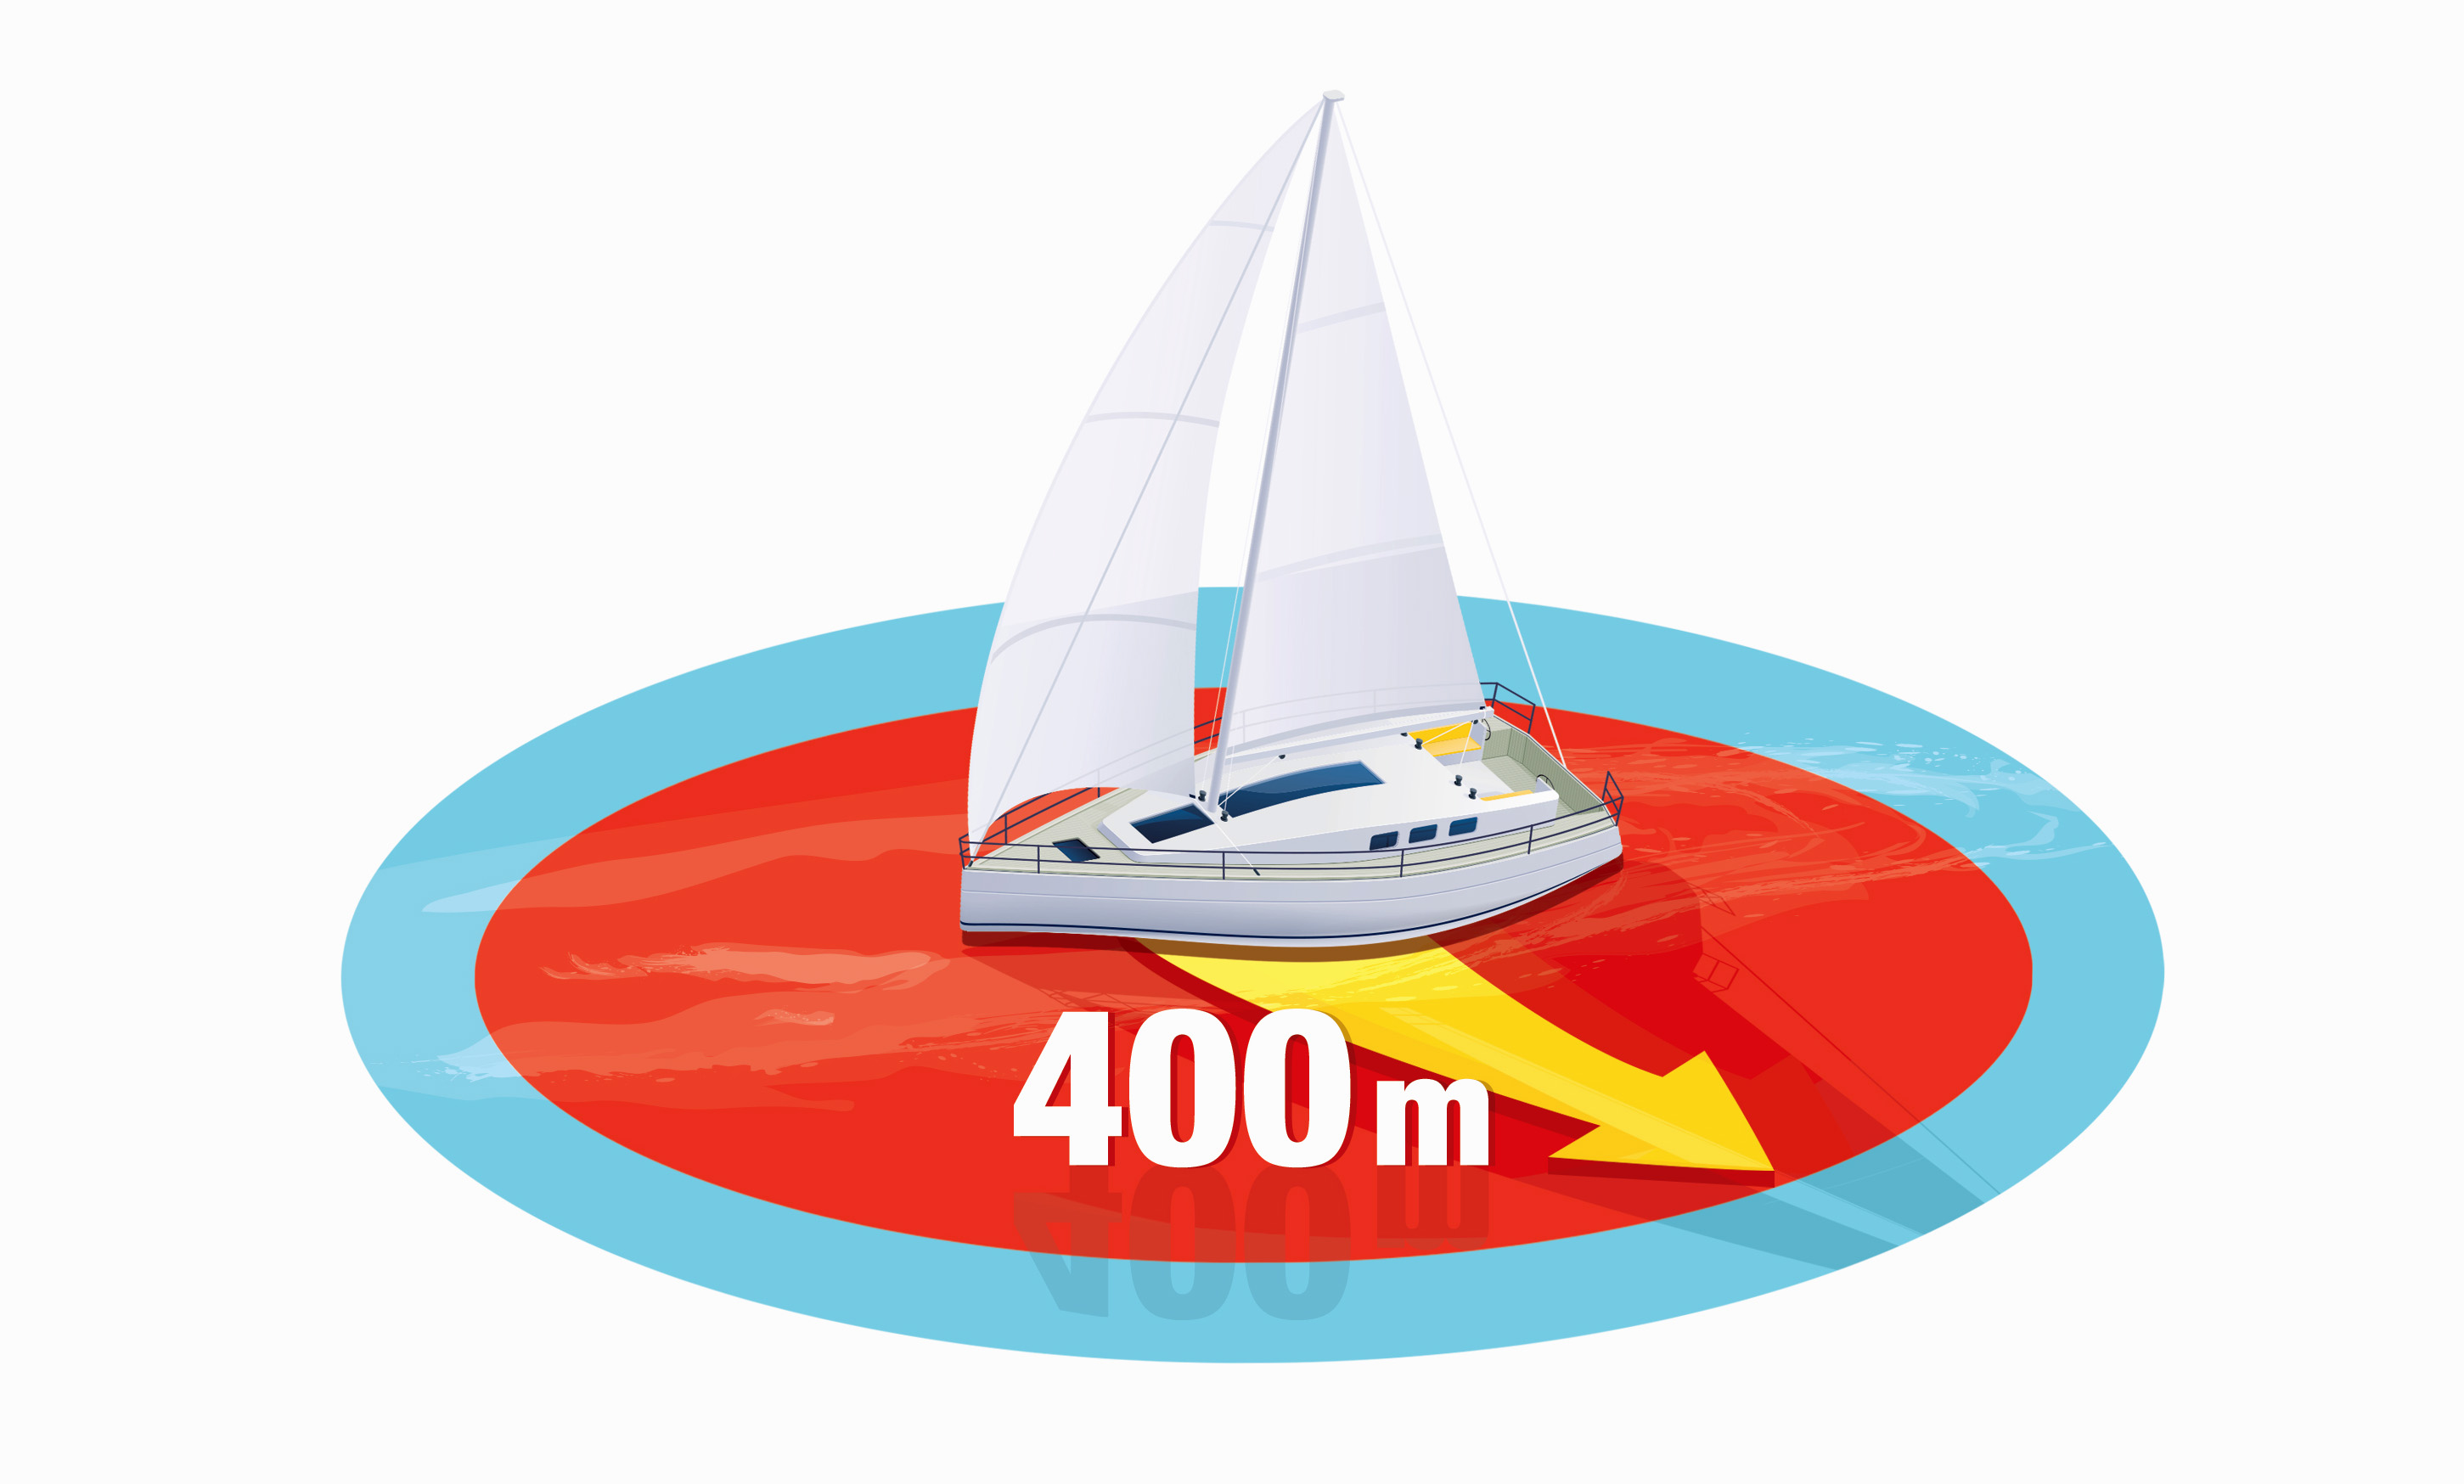 Sailing boat surrounded by a red zone with the mention 400 m